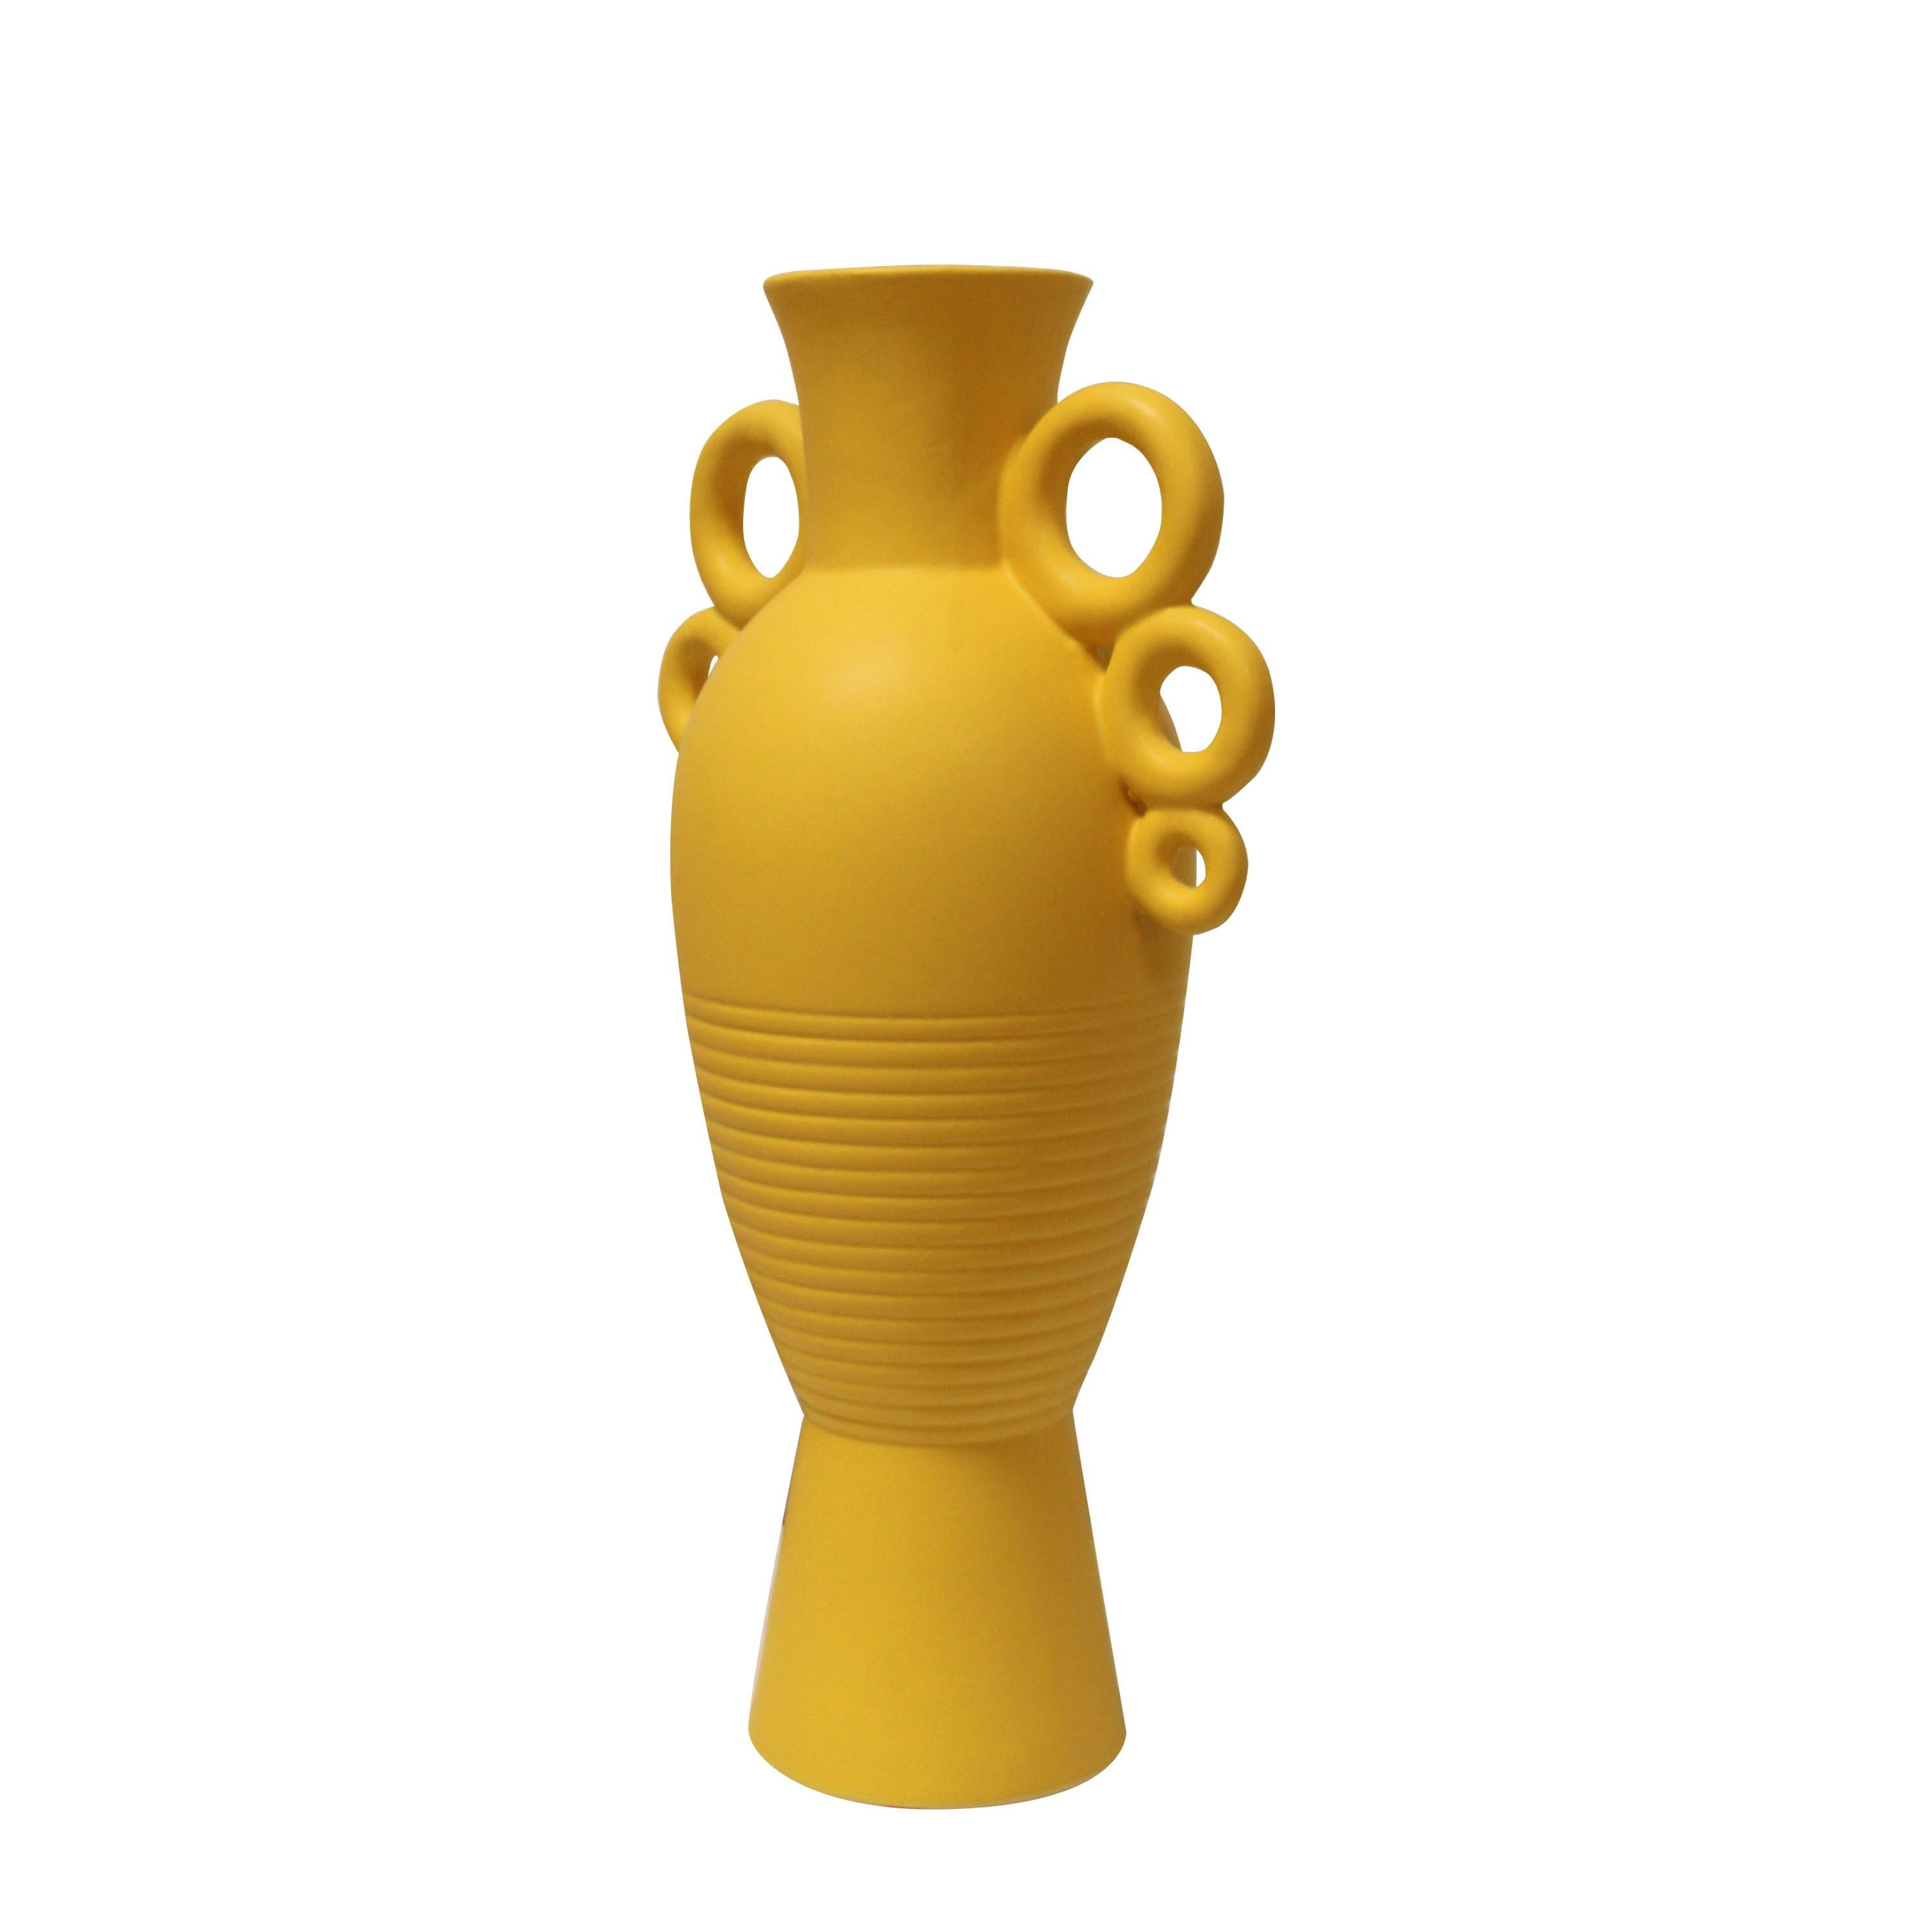 An Italian ceramic vase with a baluster-shaped body and a cylindrical neck painted Yelloew. The vase featured two handles made of 3 connected ceramic rings and an engraved lines decoration.